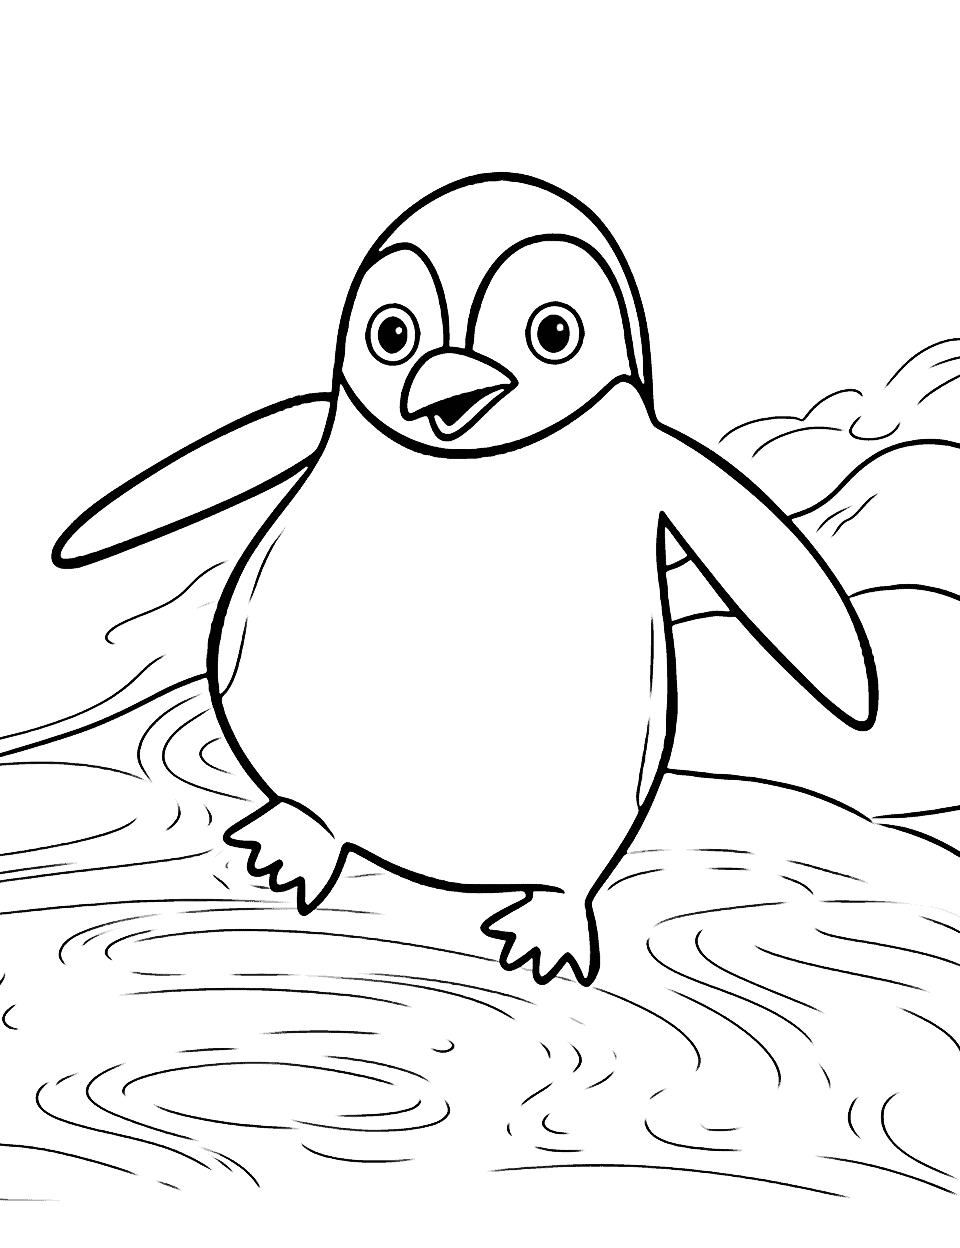 Penguin Sliding on Ice Cute Coloring Page - A cute penguin sliding on a slippery ice surface, having a joyful time.